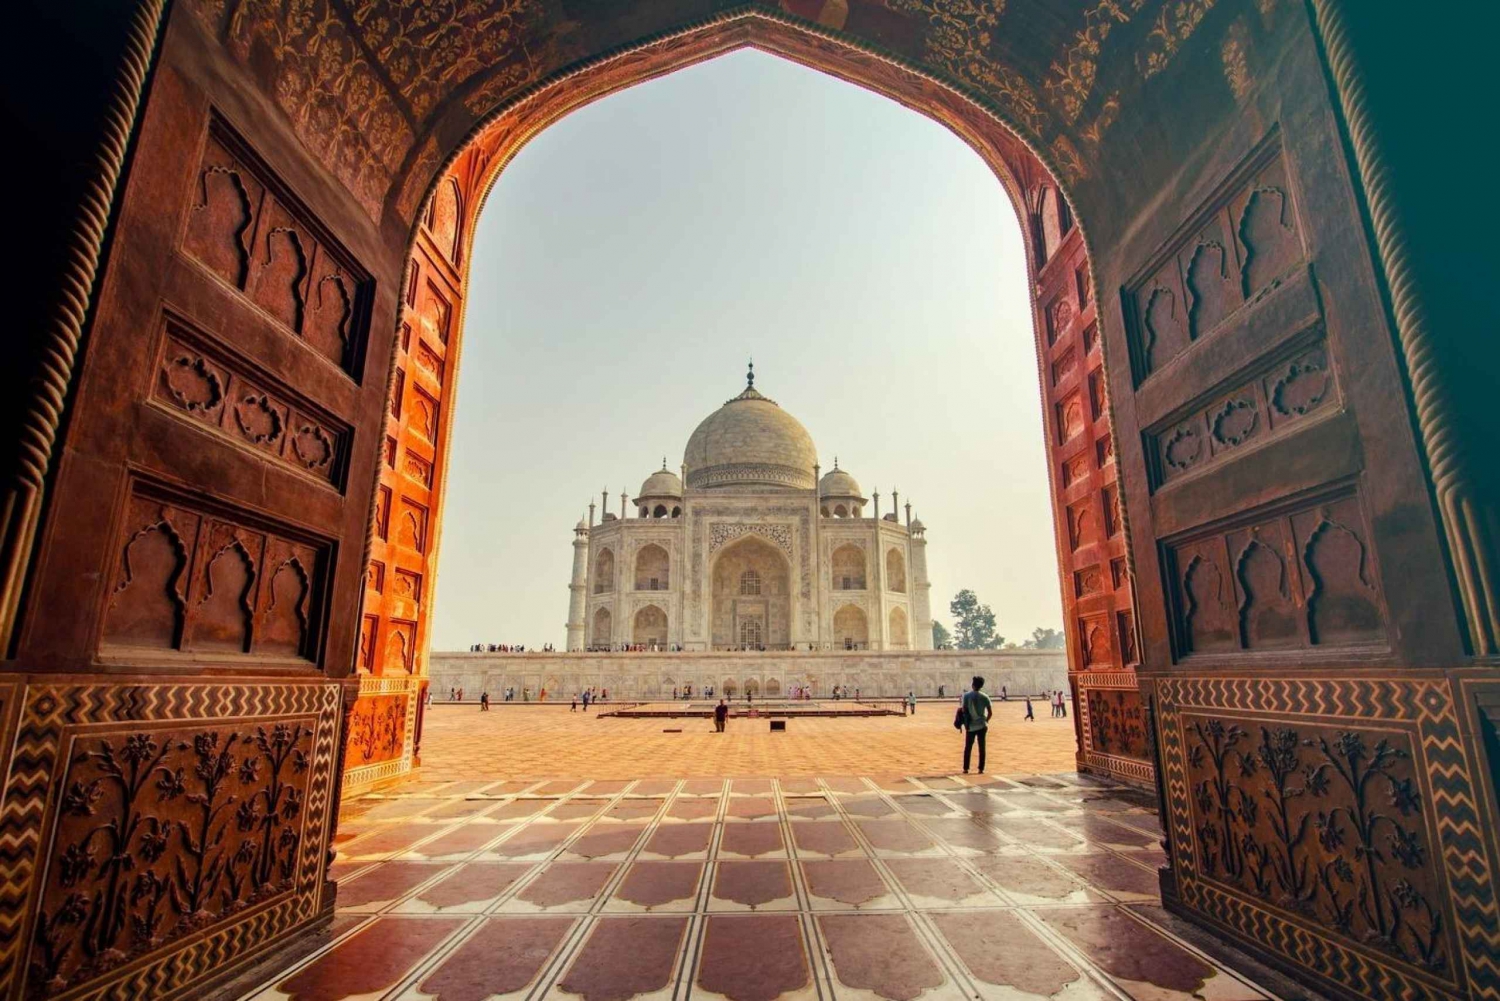 From Delhi: Delhi, Agra, and Jaipur 3-Day Guided Trip